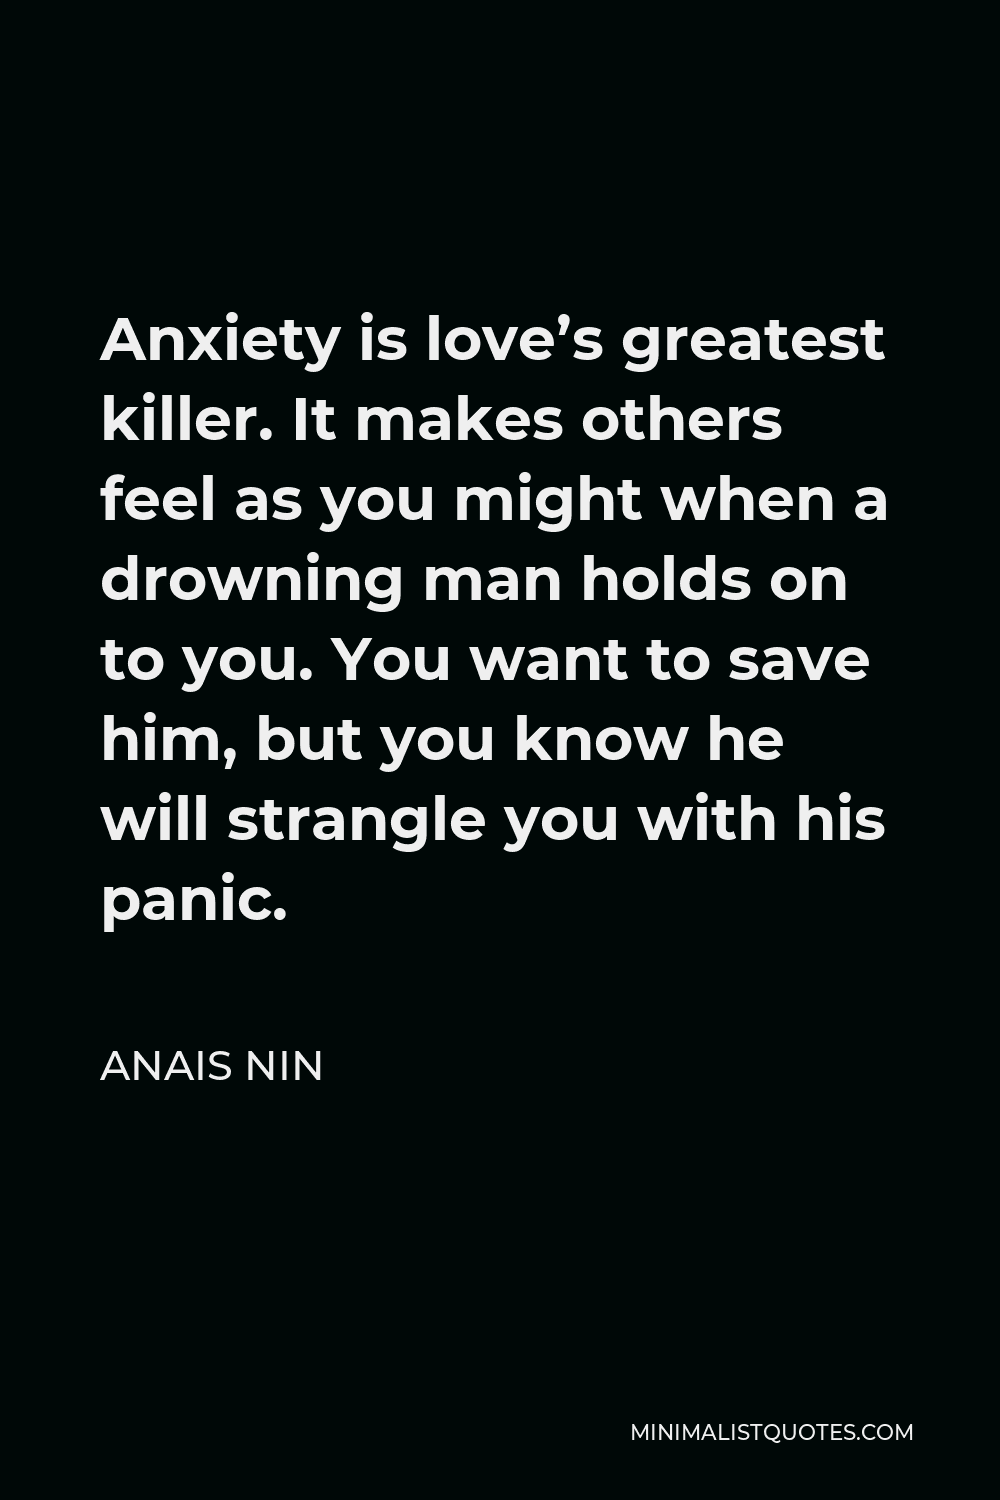 Anais Nin Quote - Anxiety is love’s greatest killer. It makes others feel as you might when a drowning man holds on to you. You want to save him, but you know he will strangle you with his panic.